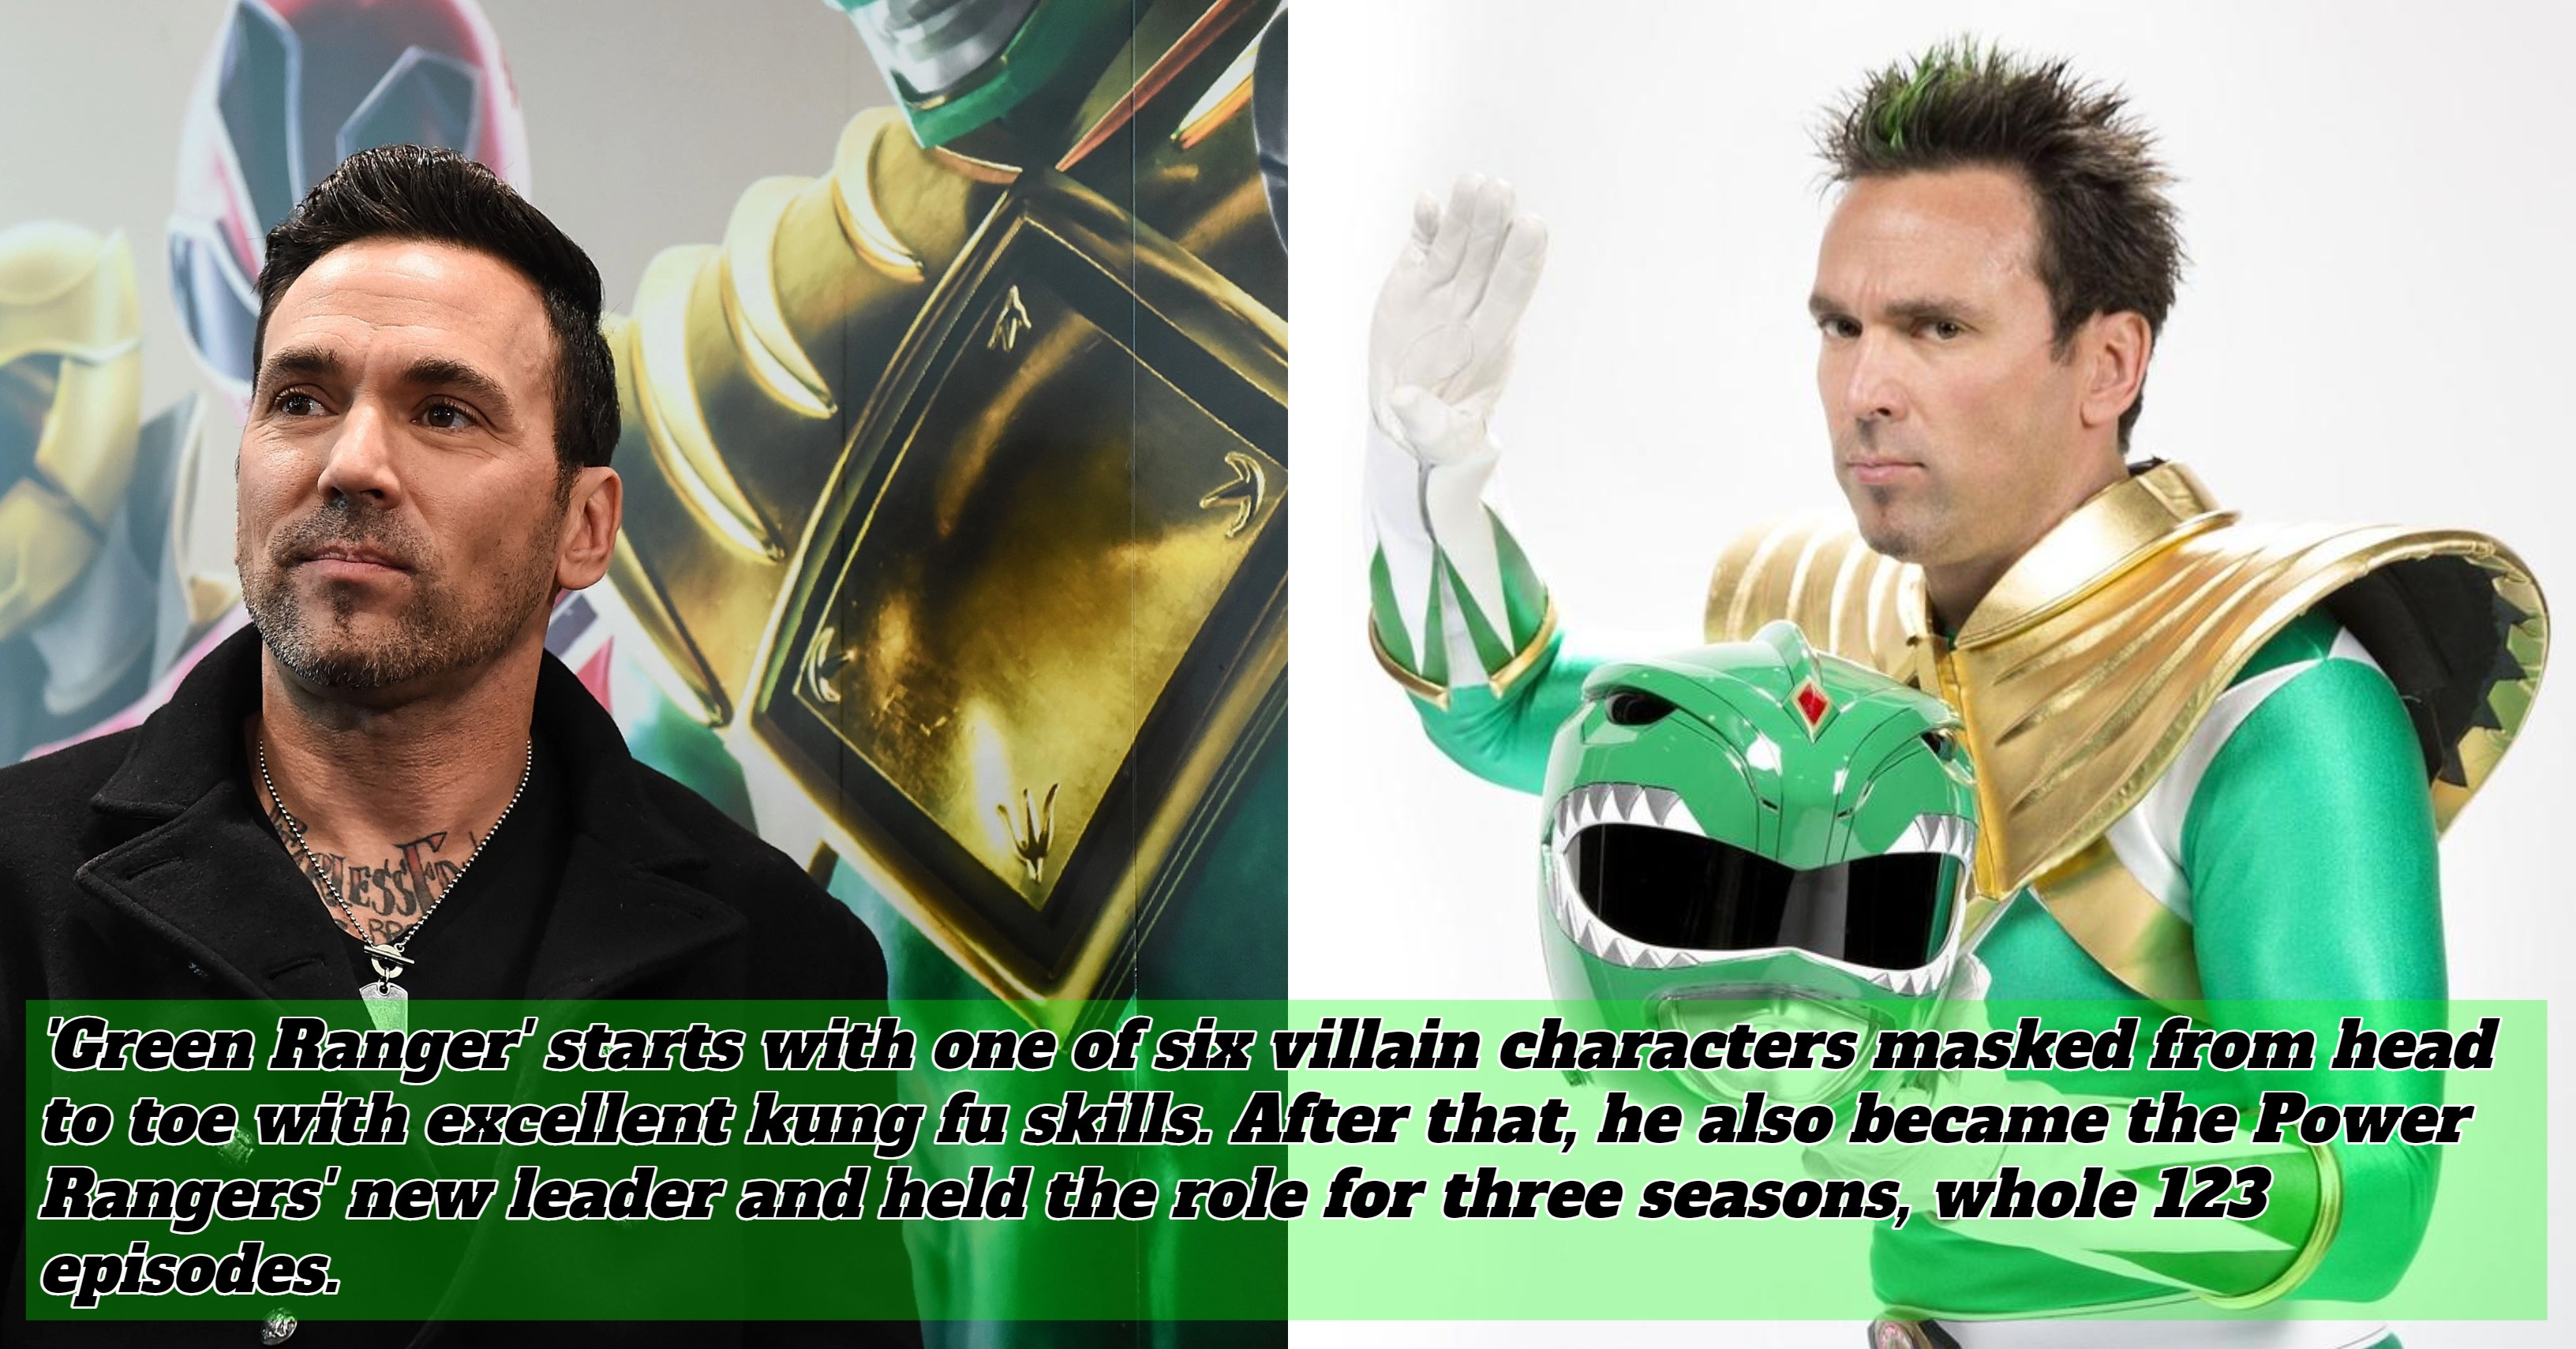 'Green Ranger' starts with one of six villain characters masked from head to toe with excellent kung fu skills. After that, he also became the Power Rangers' new leader and held the role for three seasons, whole 123 episodes. The Ranger character, played by Frank, is beloved. That is what causes 'Power Rangers' often to release the latest season of the television series.